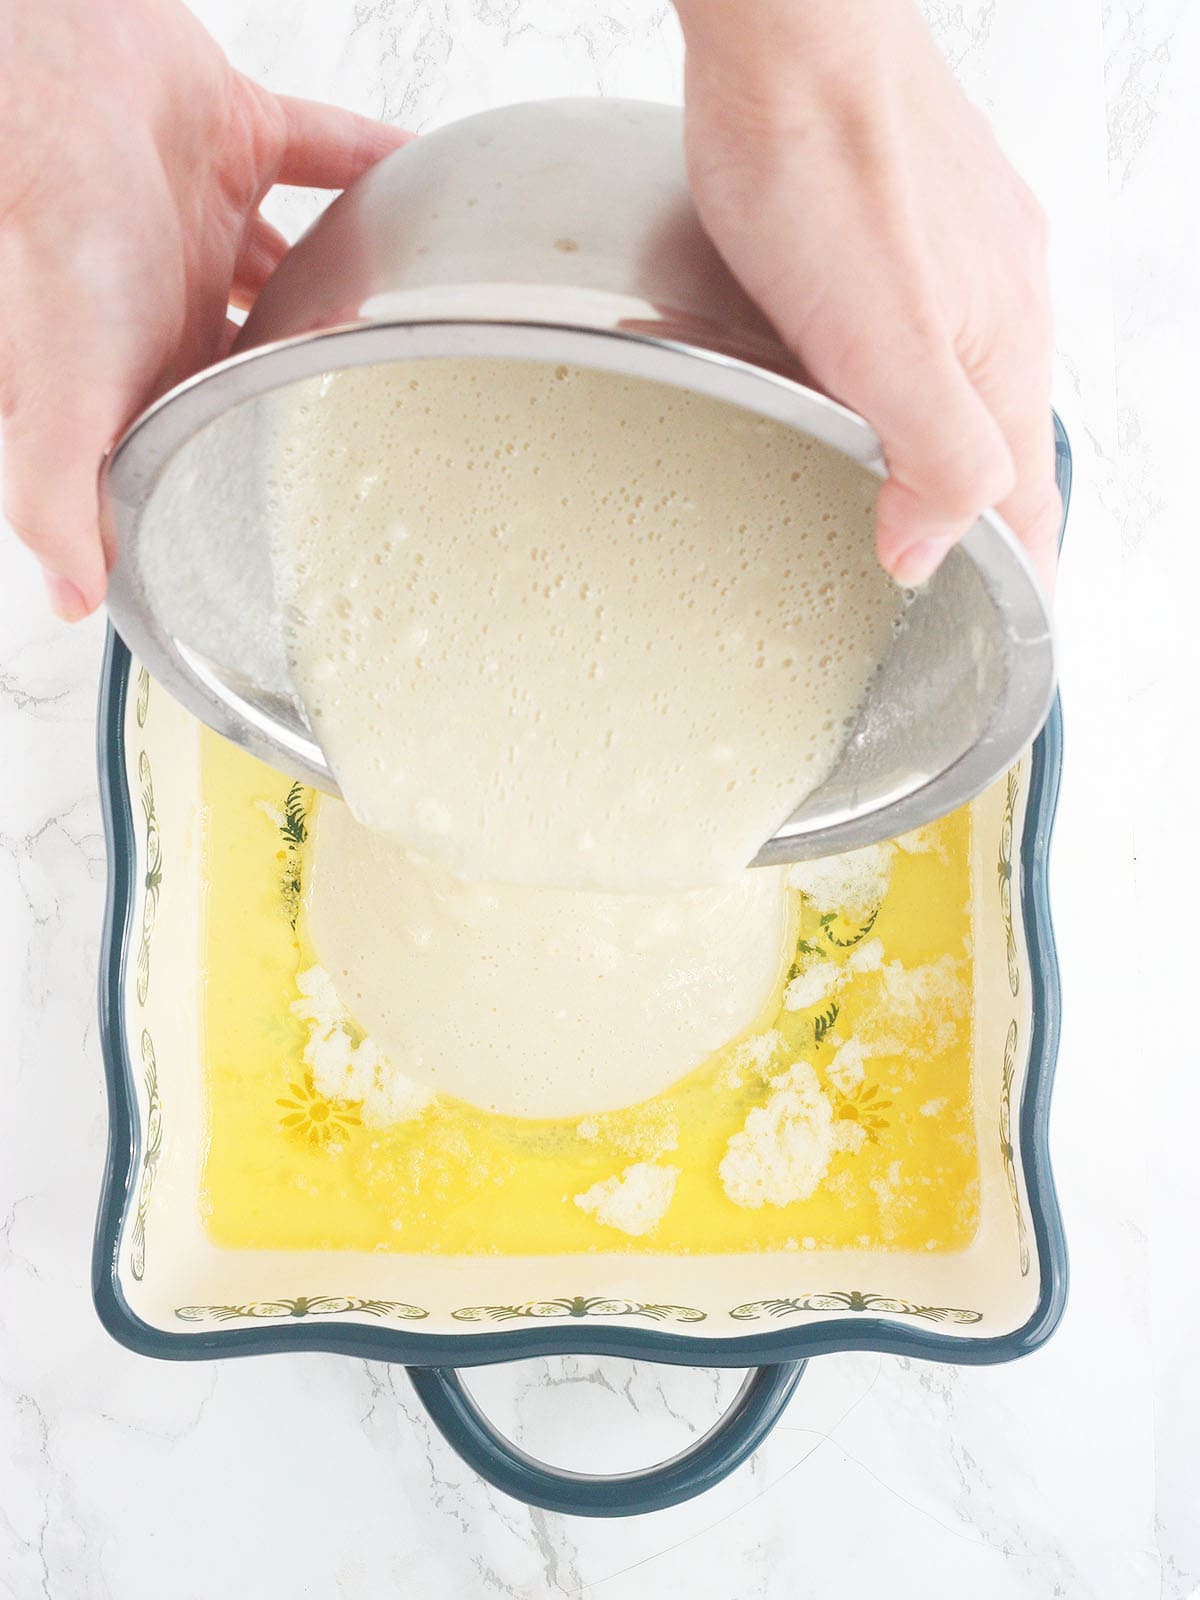 pouring batter over the melted butter in a baking dish